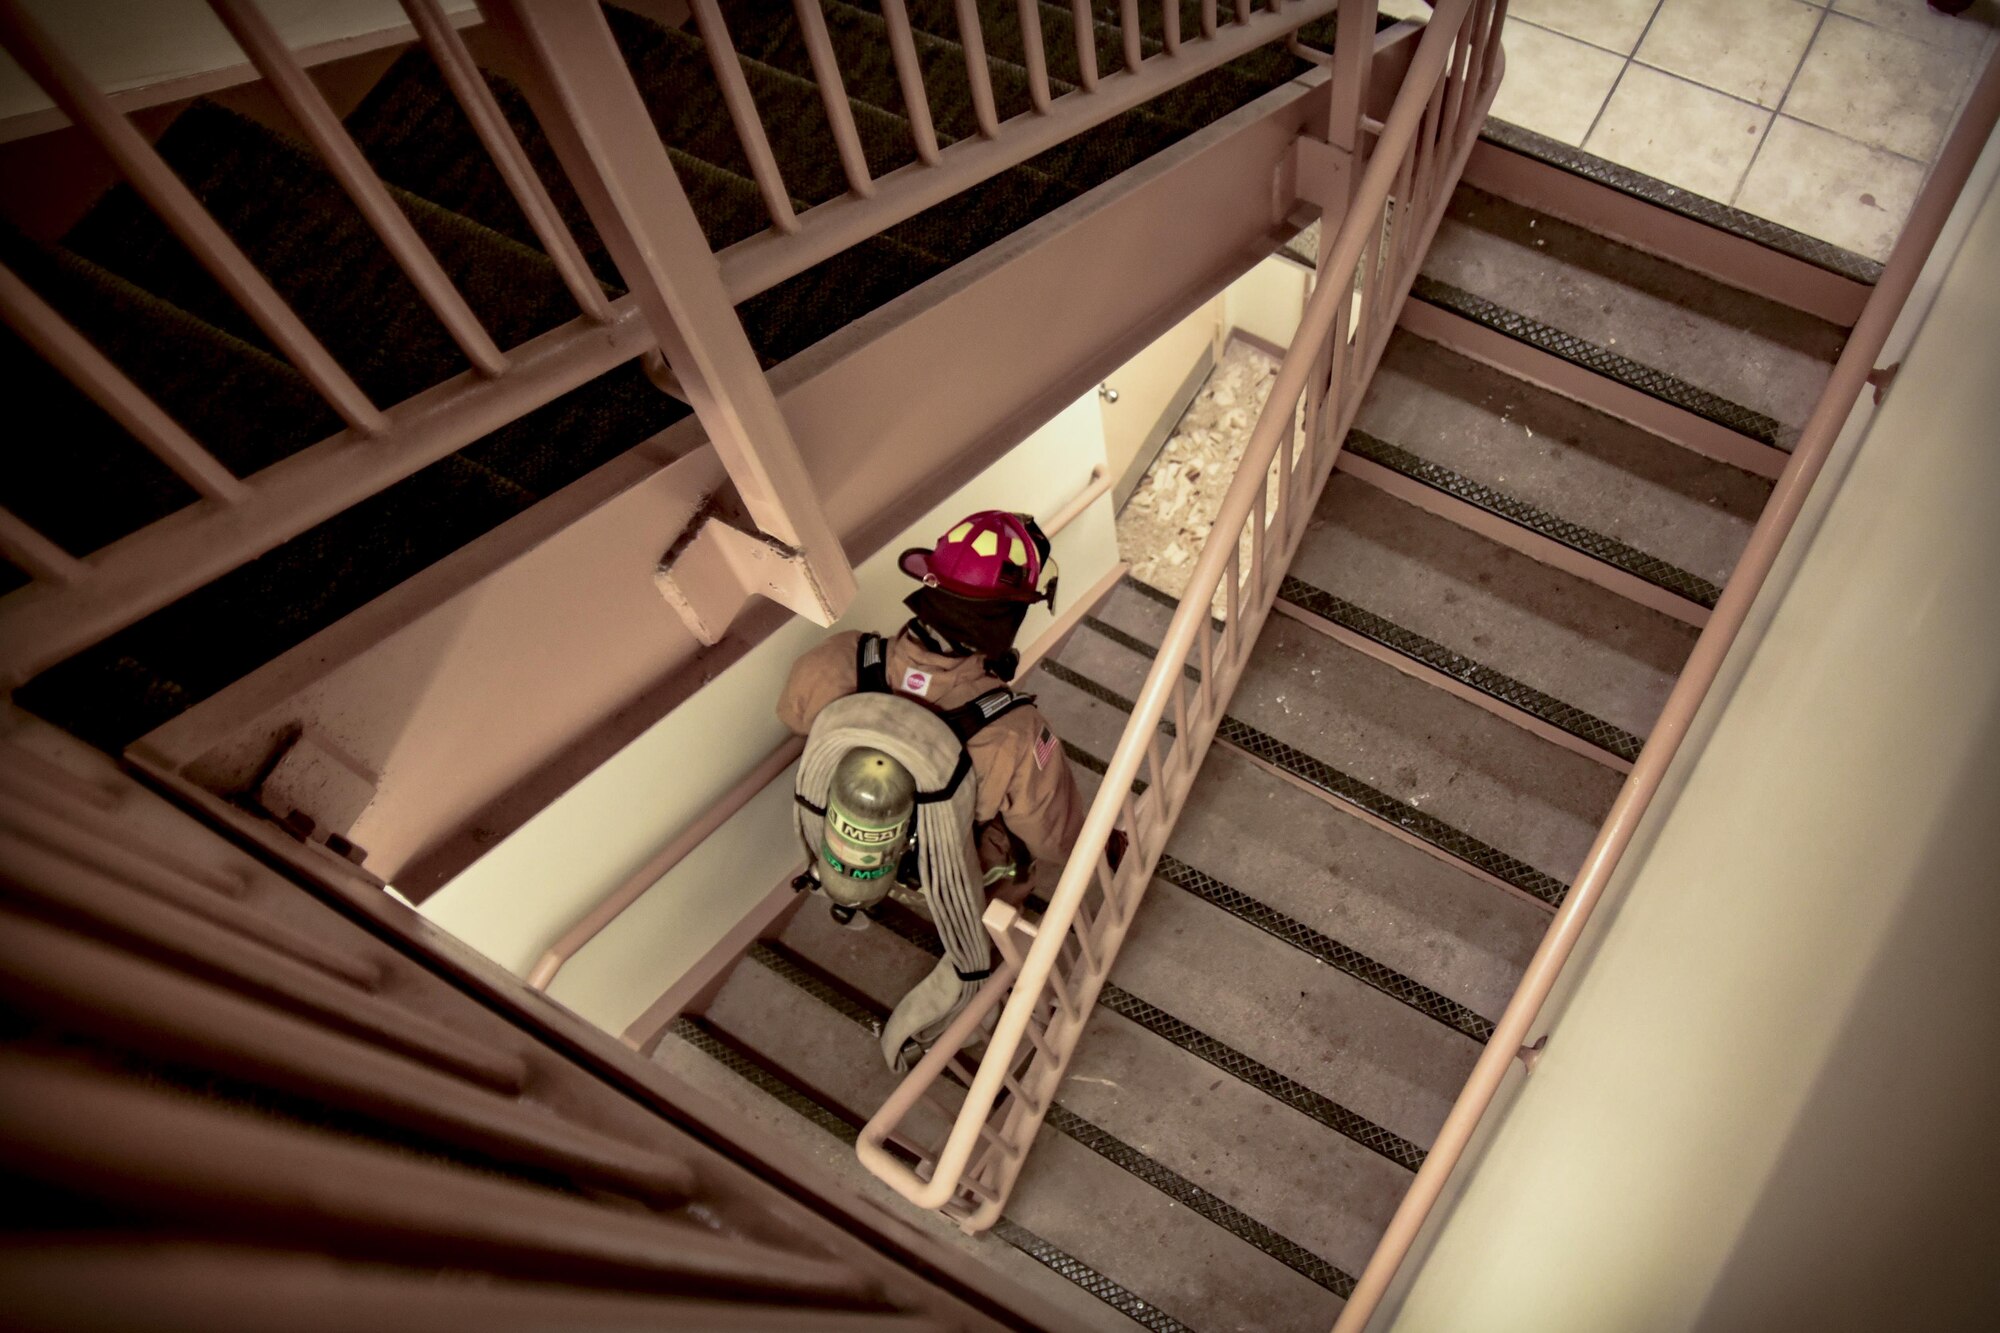 Staff Sgt. Blaine Erway, 99th Civil Engineer Squadron firefighter crew chief, descends the air traffic control stairwell during Red Flag 17-3 at Nellis Air Force Base, Nev. July 18, 2017. The team ascended more than 10 flights of stairs with more than 130 pounds of gear in less than two minutes to practice emergency response capabilities at the top of the air traffic control tower. (U.S. Air Force photo by Airman 1st Class Andrew D. Sarver/Released)